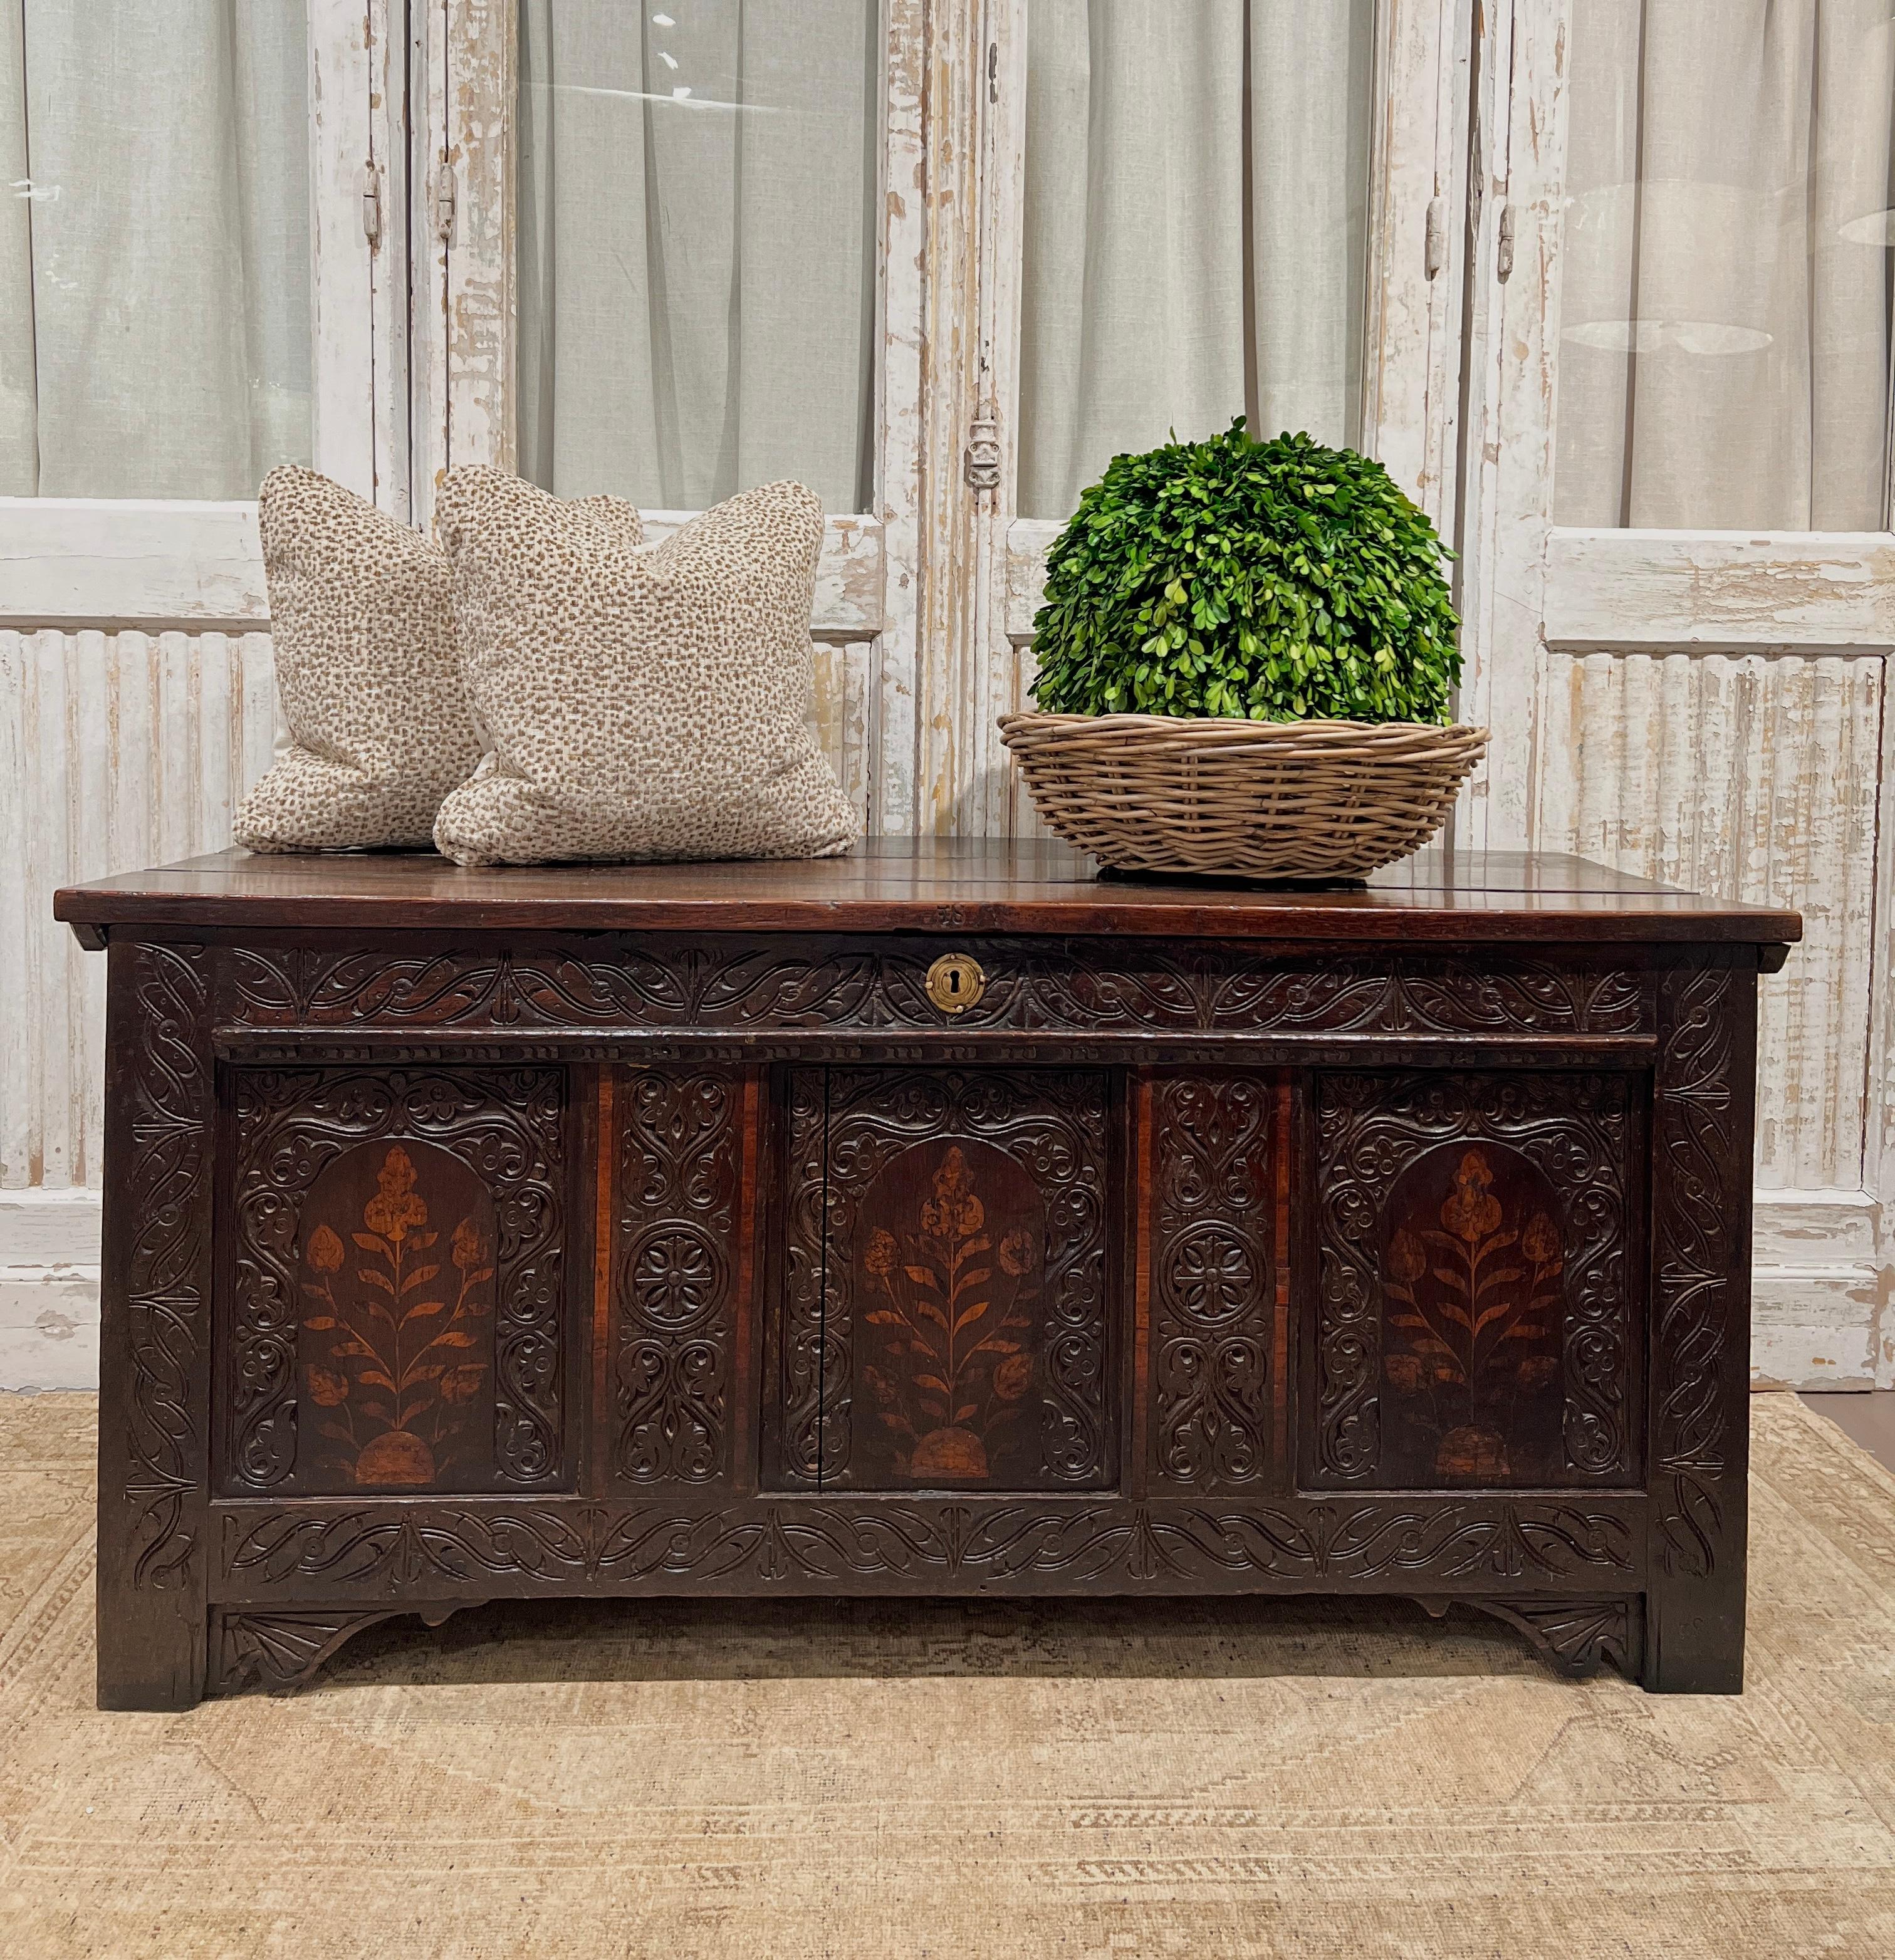 circa late 18th - early 19th century, England.

This stunning antique oak blanket chest/coffer is truly a work of art. The front side features three beautiful floral inlays surrounded by intricately hand-carved details, a brass center (lock) and